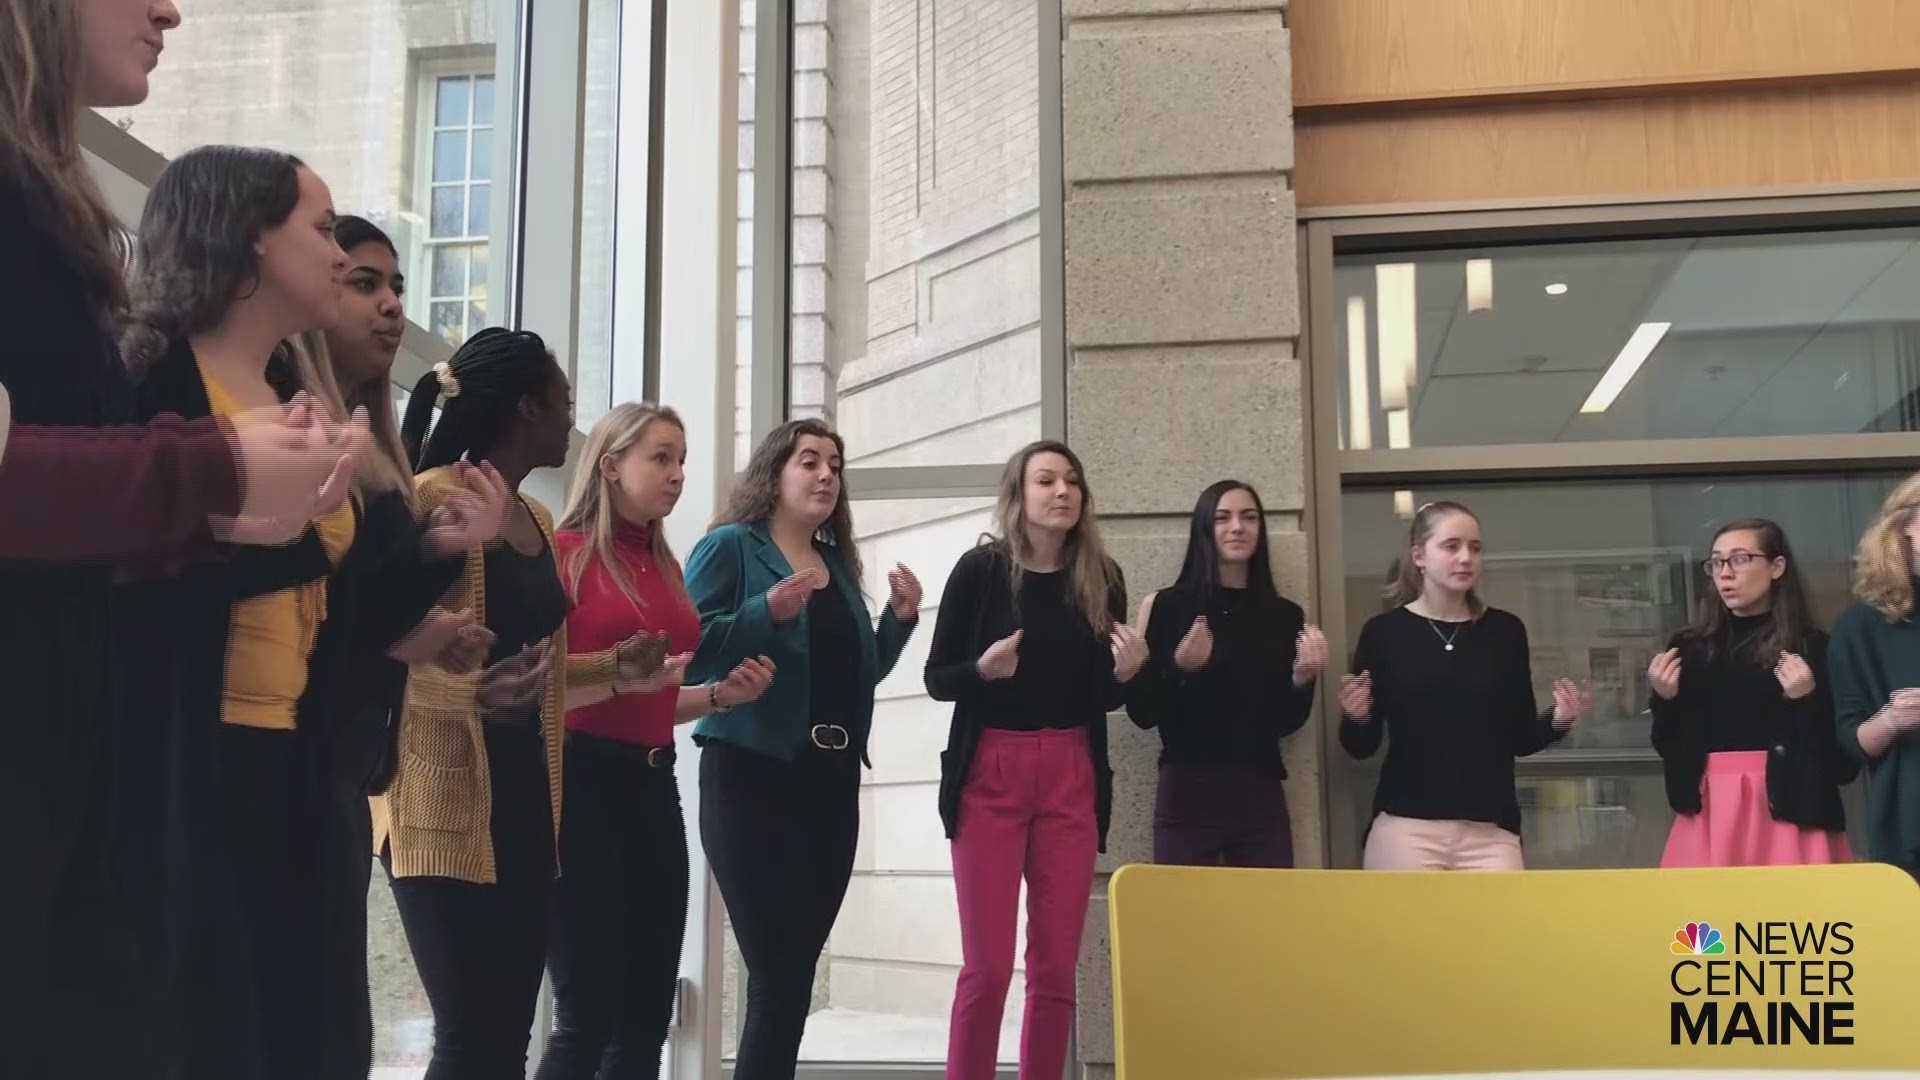 The White Stripes' "Seven Nation Army" gets an a cappella reboot by the group Renaissance in their kickoff performance for Bangor Humanities Day.